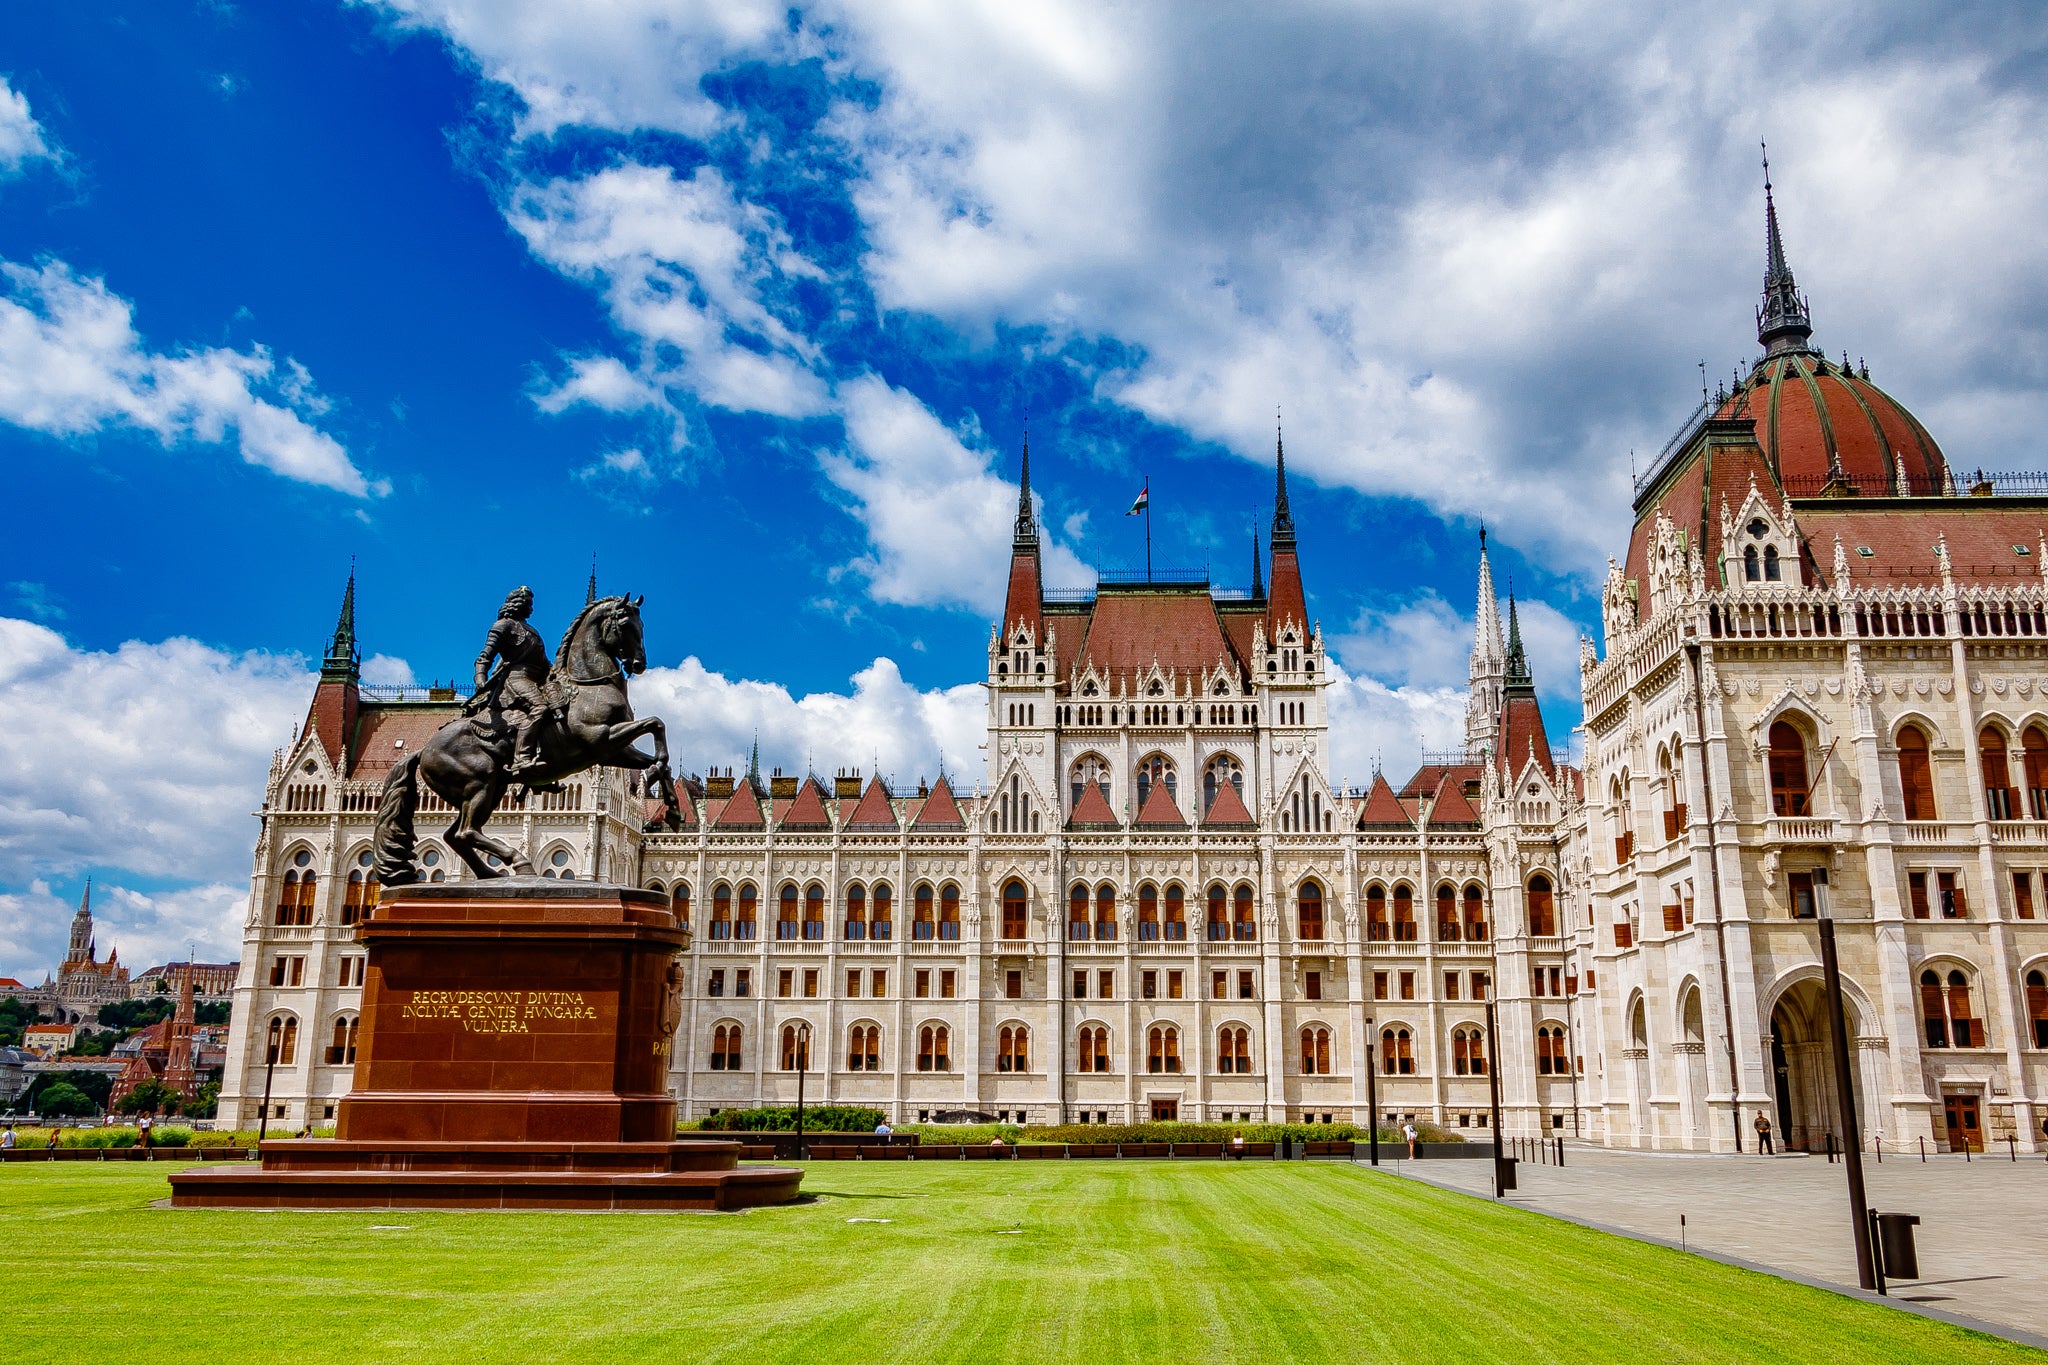 The spectacular exterior of the Hungarian parliament